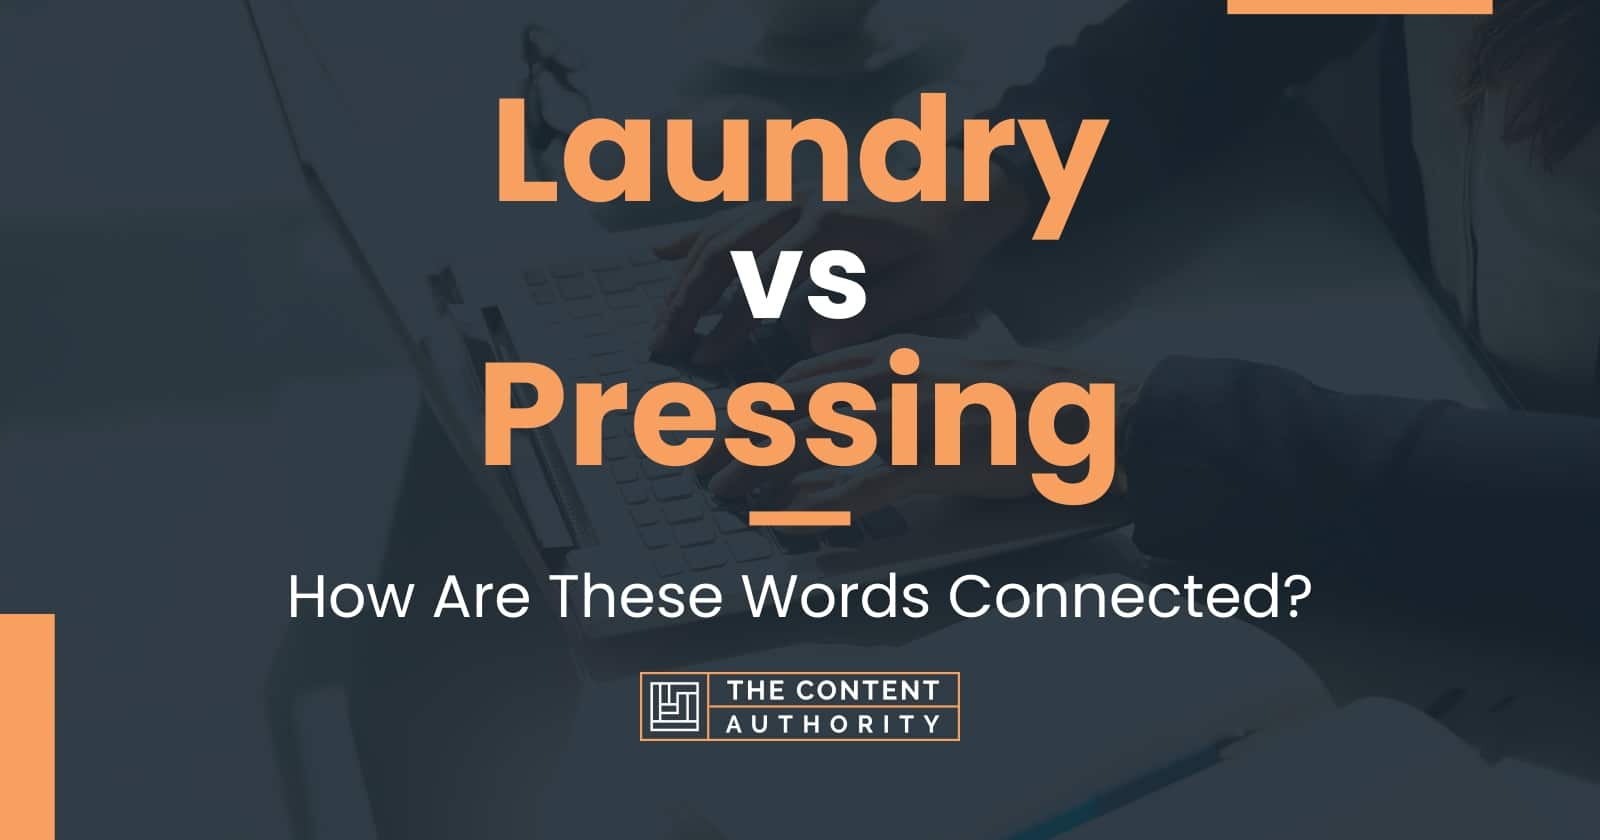 Laundry vs Pressing: How Are These Words Connected?